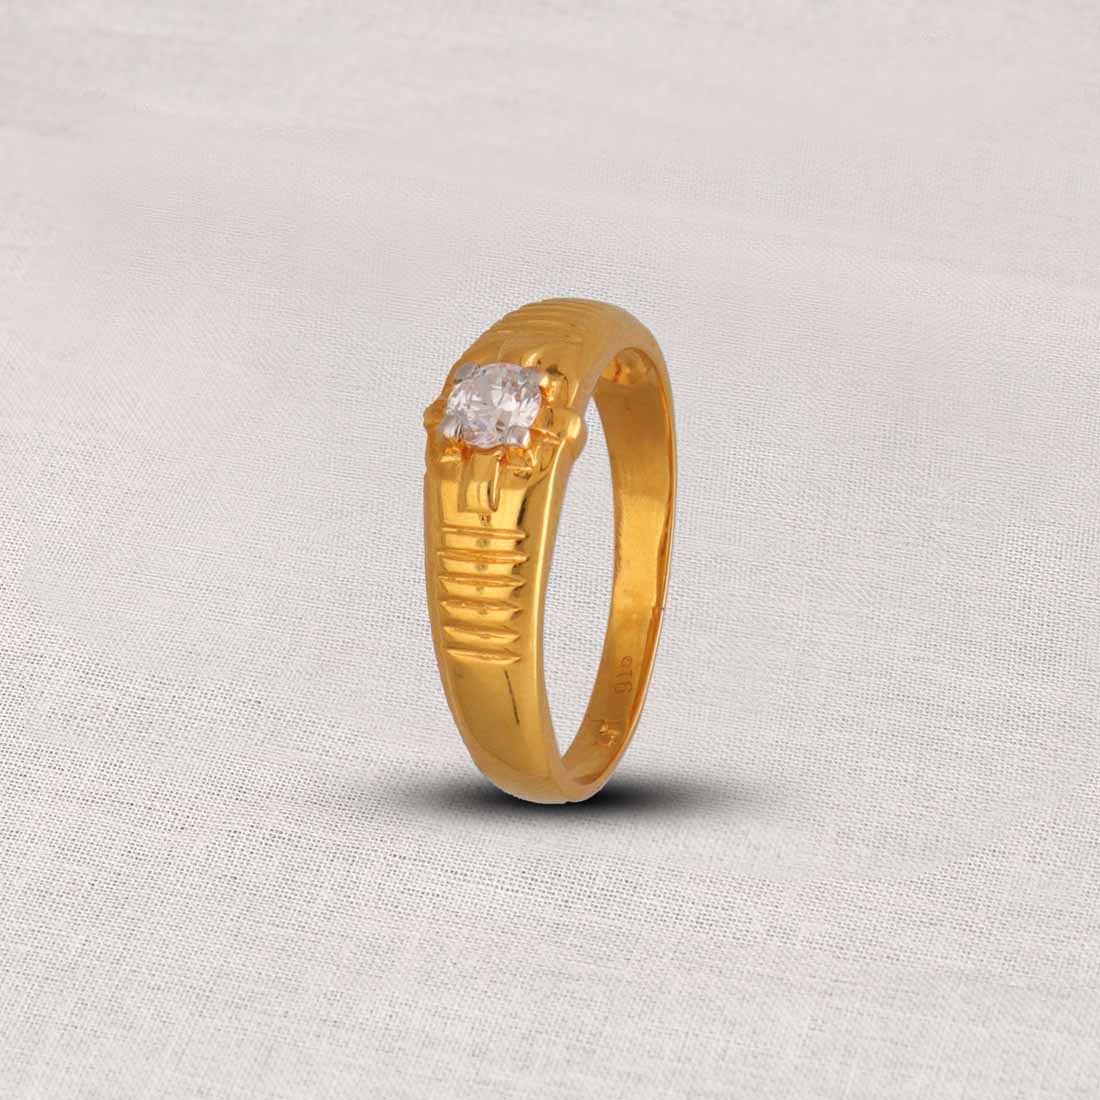 Real Diamond Ring Mens Design Real Solid Gold Lab Diamond Men's Wedding Band  Iced Out Jewelry Ring at Rs 137000 | Dabholi Village | Surat | ID:  25157849330